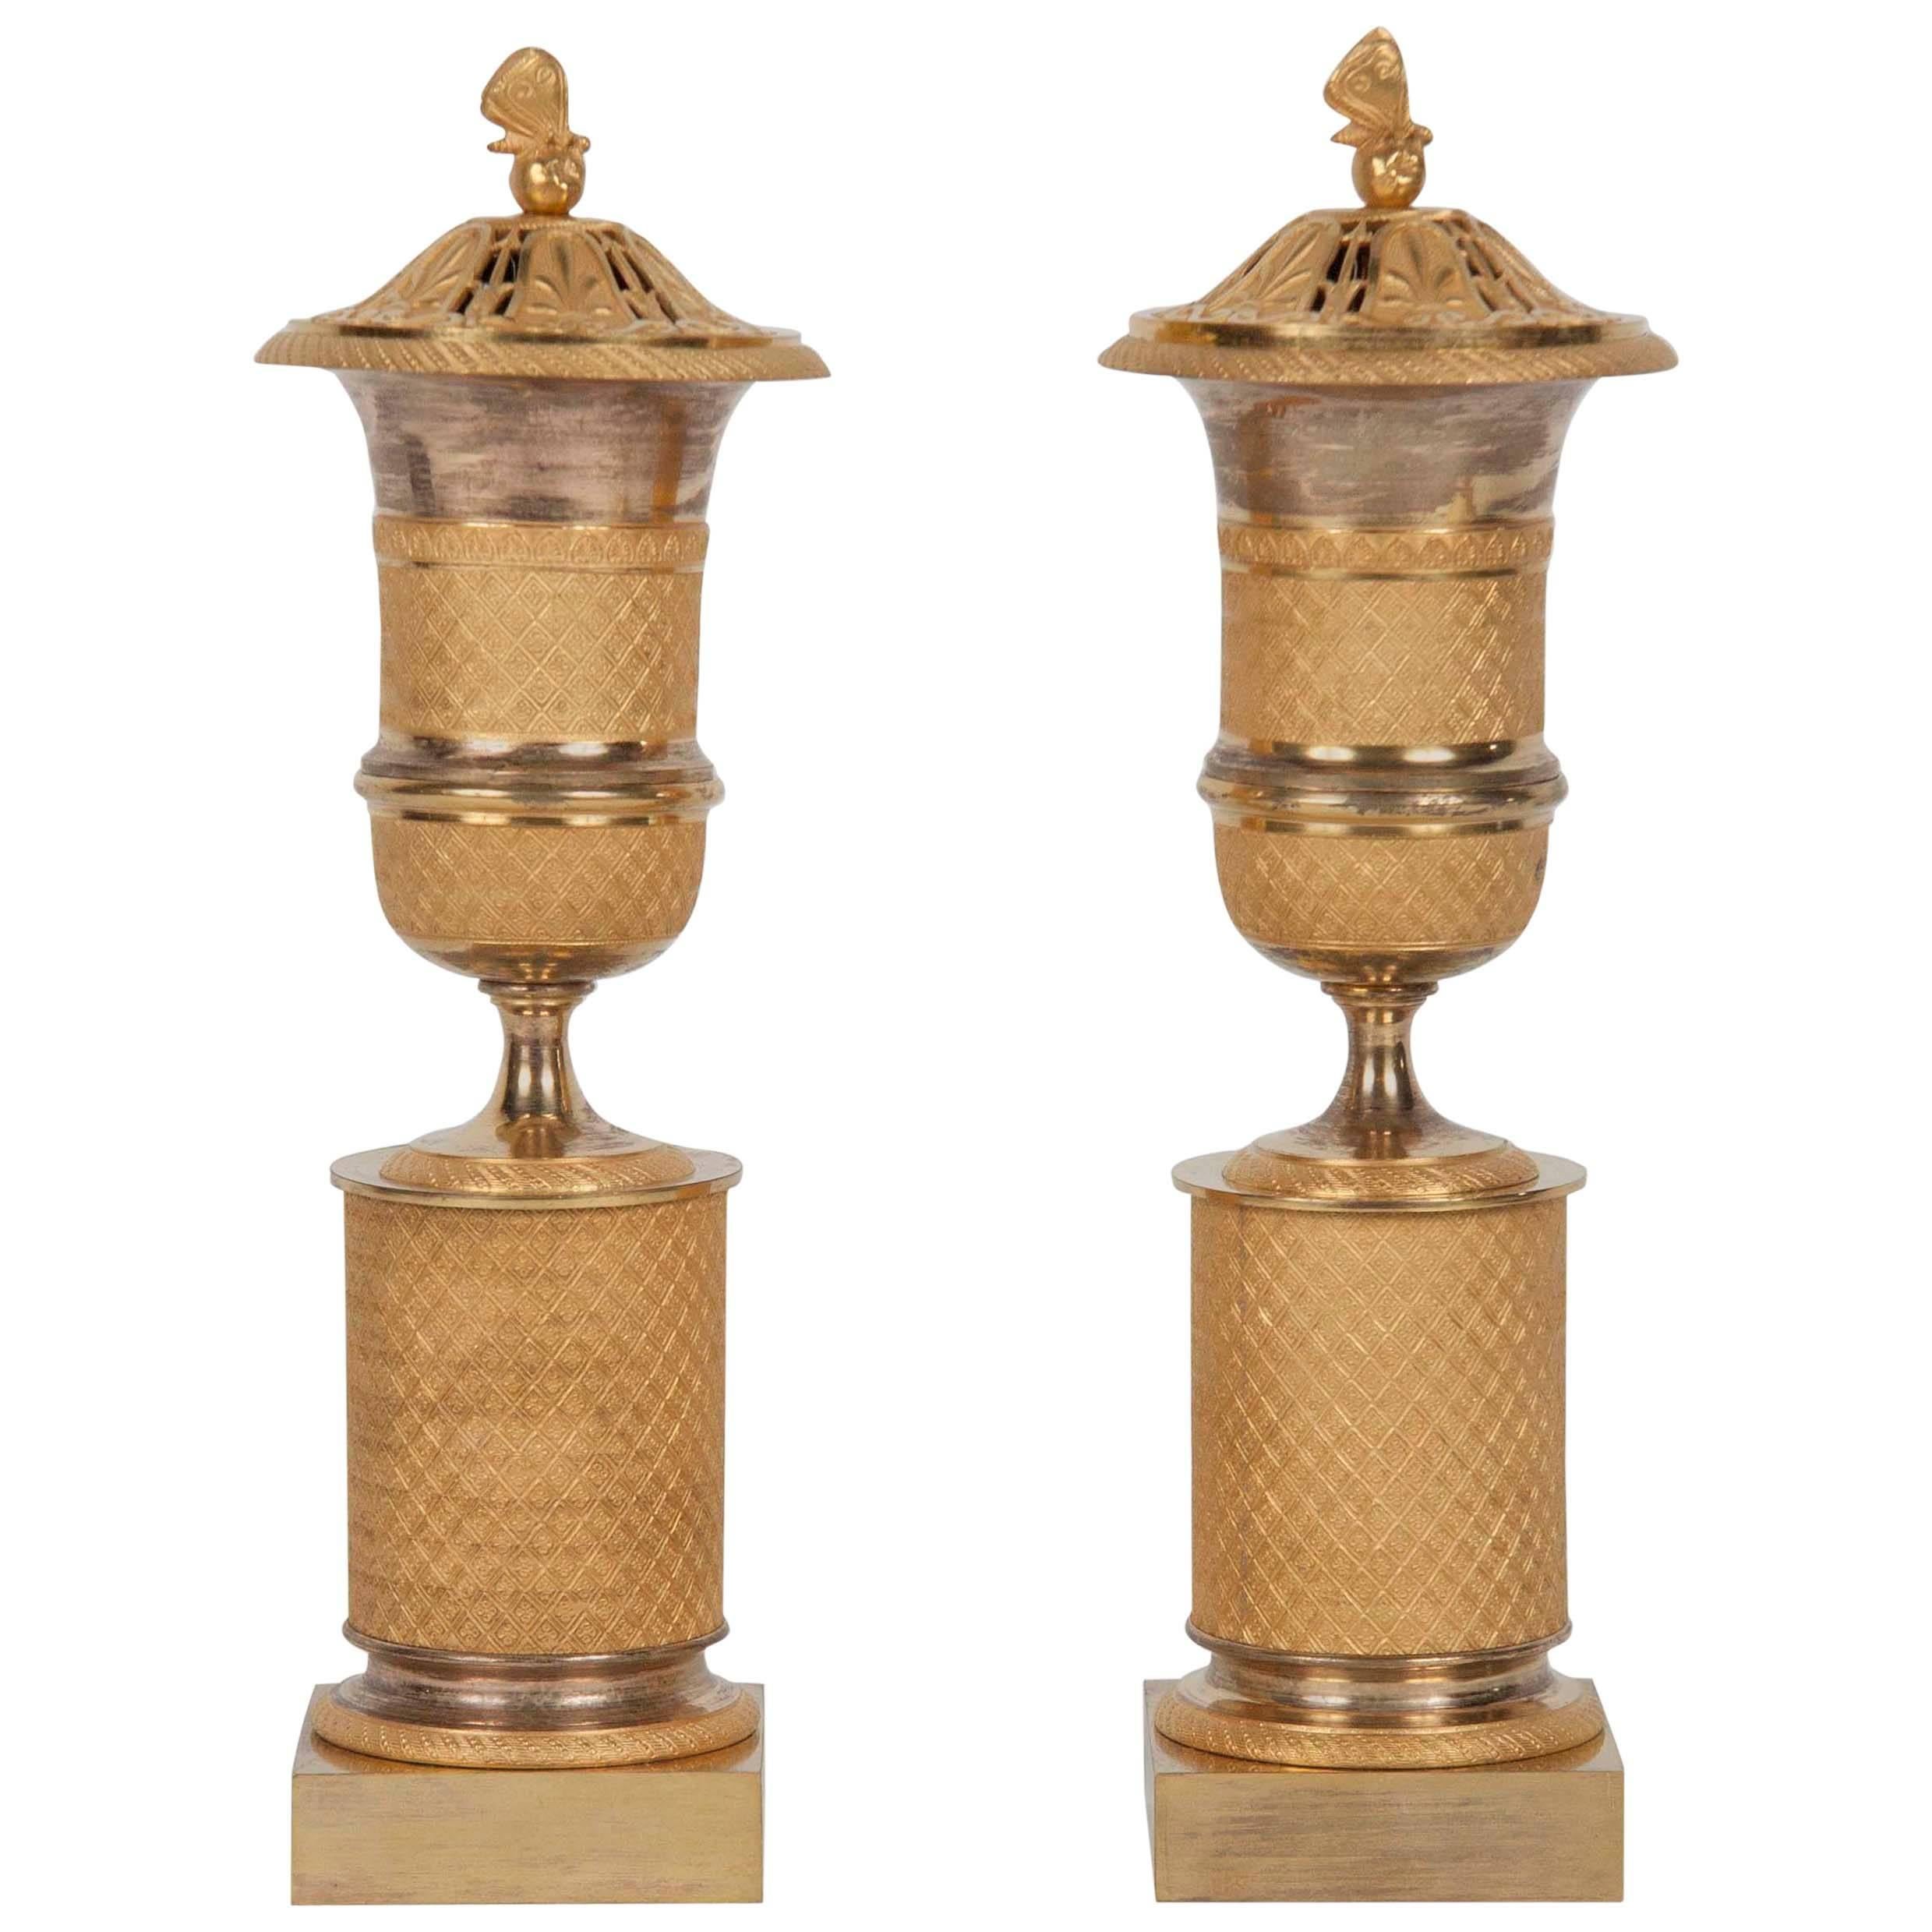 Pair of French Ormolu Bronze Cassolettes or Censers/Candlesticks